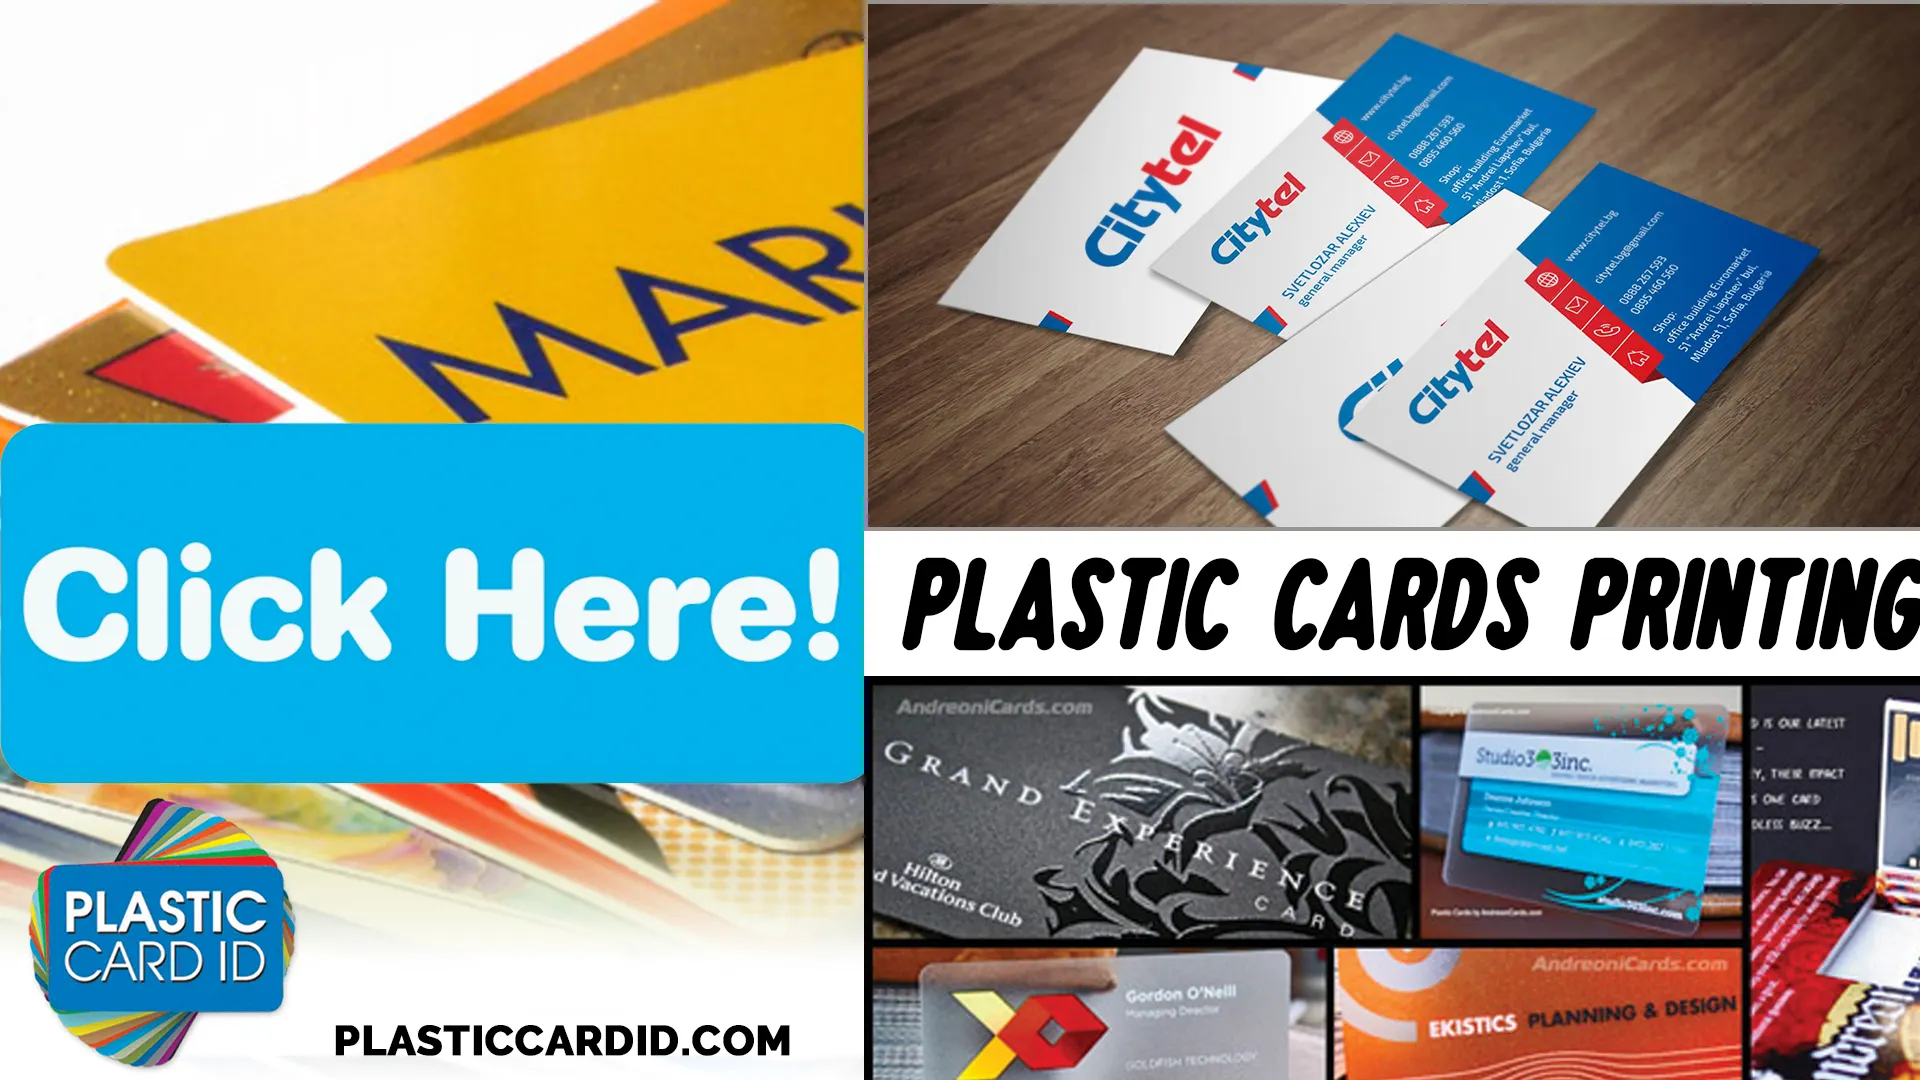 Quality and Reliability in Plastic Card Printing